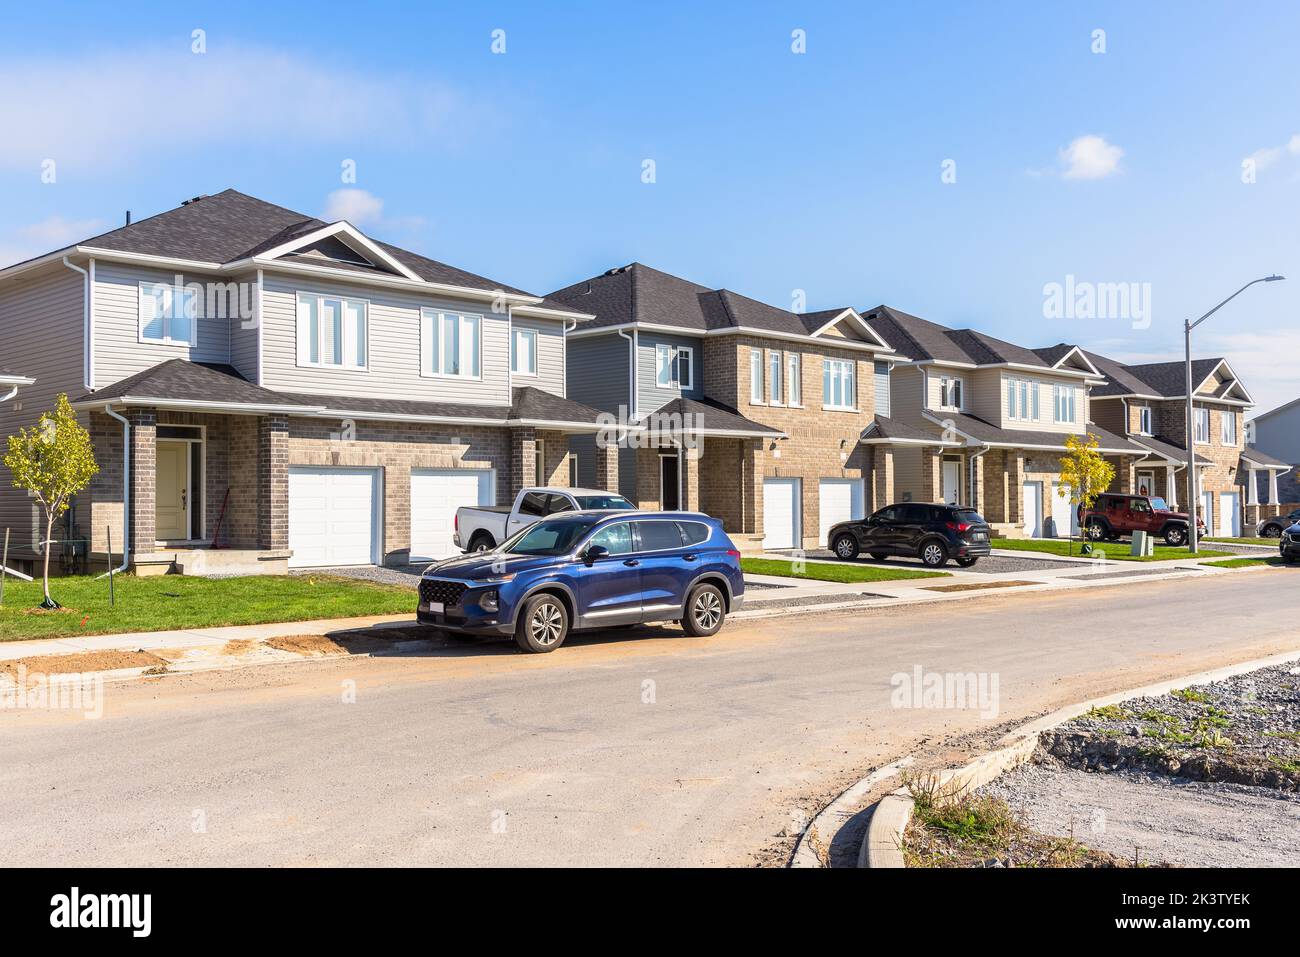 New semi-detached houses along a street in a housing development on a sunny autumn day Stock Photo